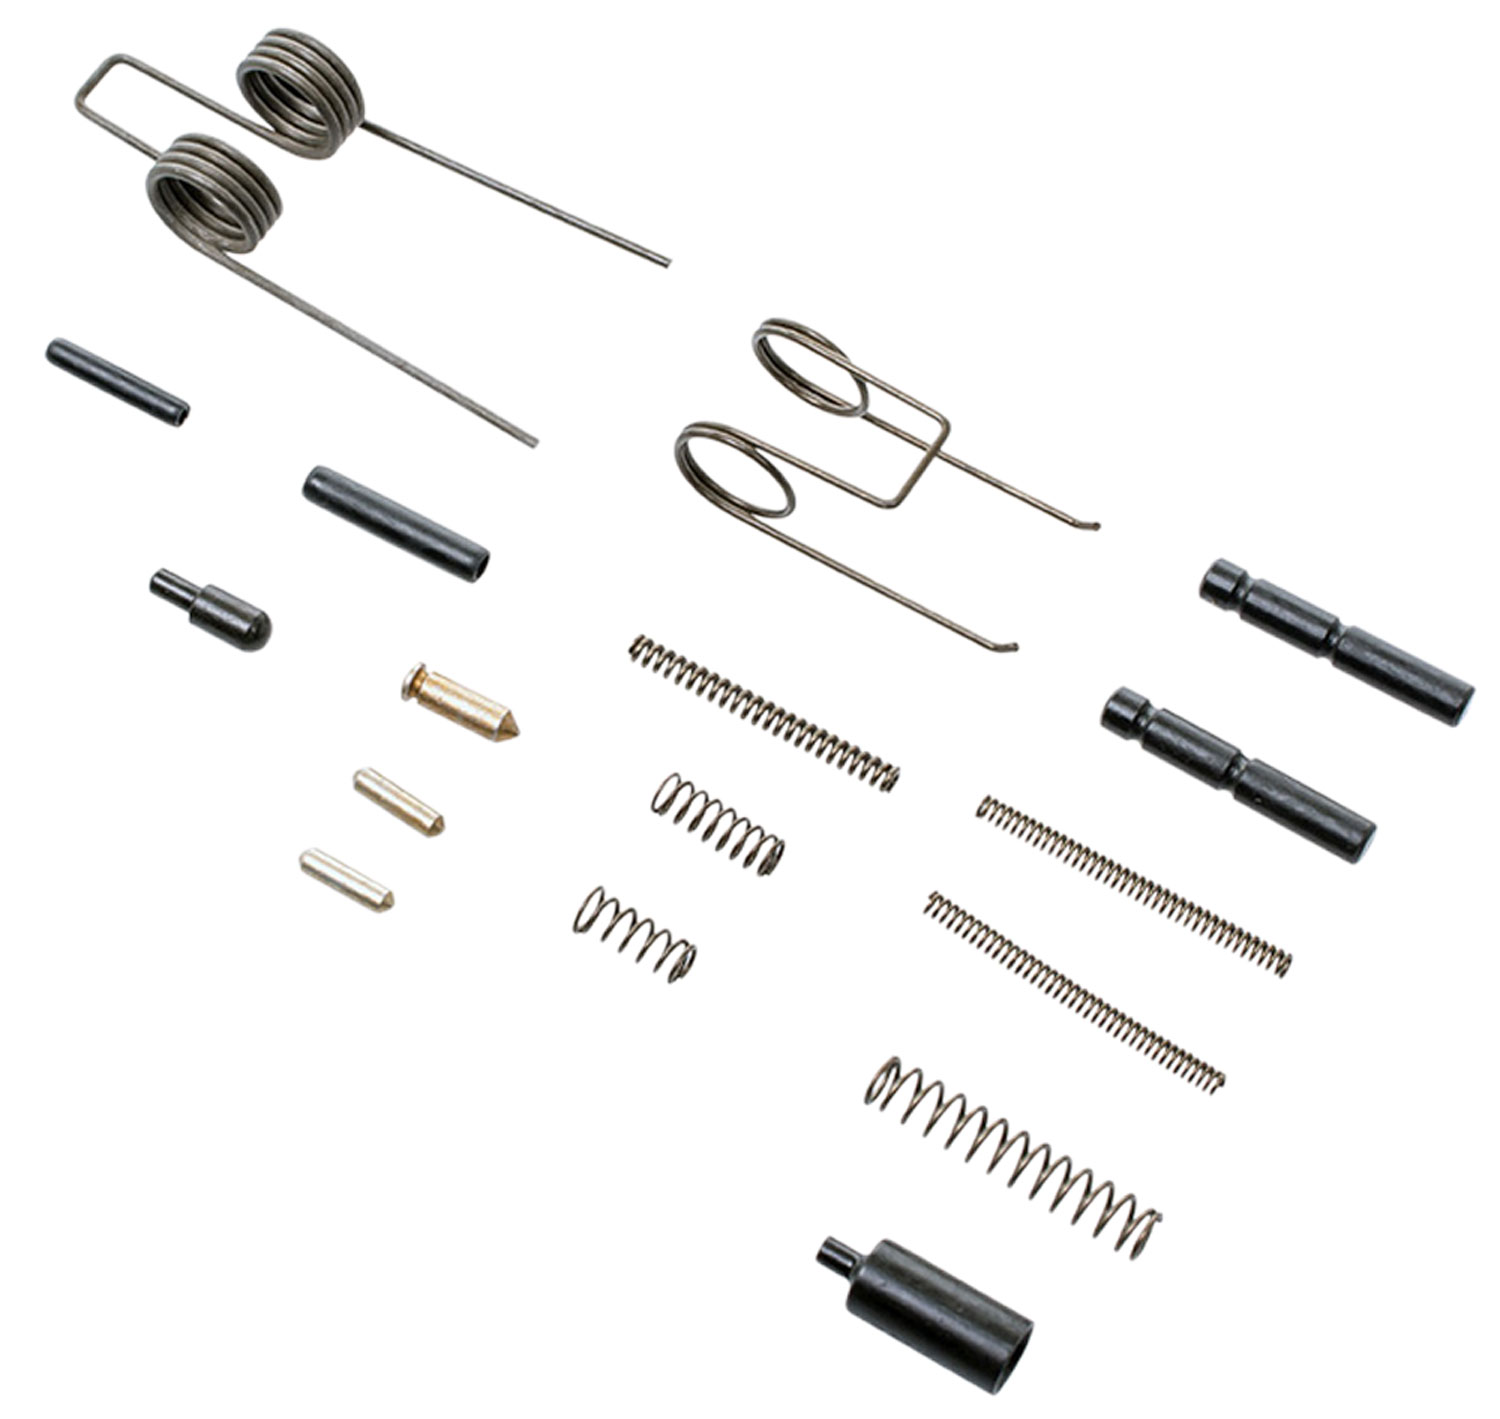 CMMG 55AFF75 Lower Parts Kit Pins & Springs AR15